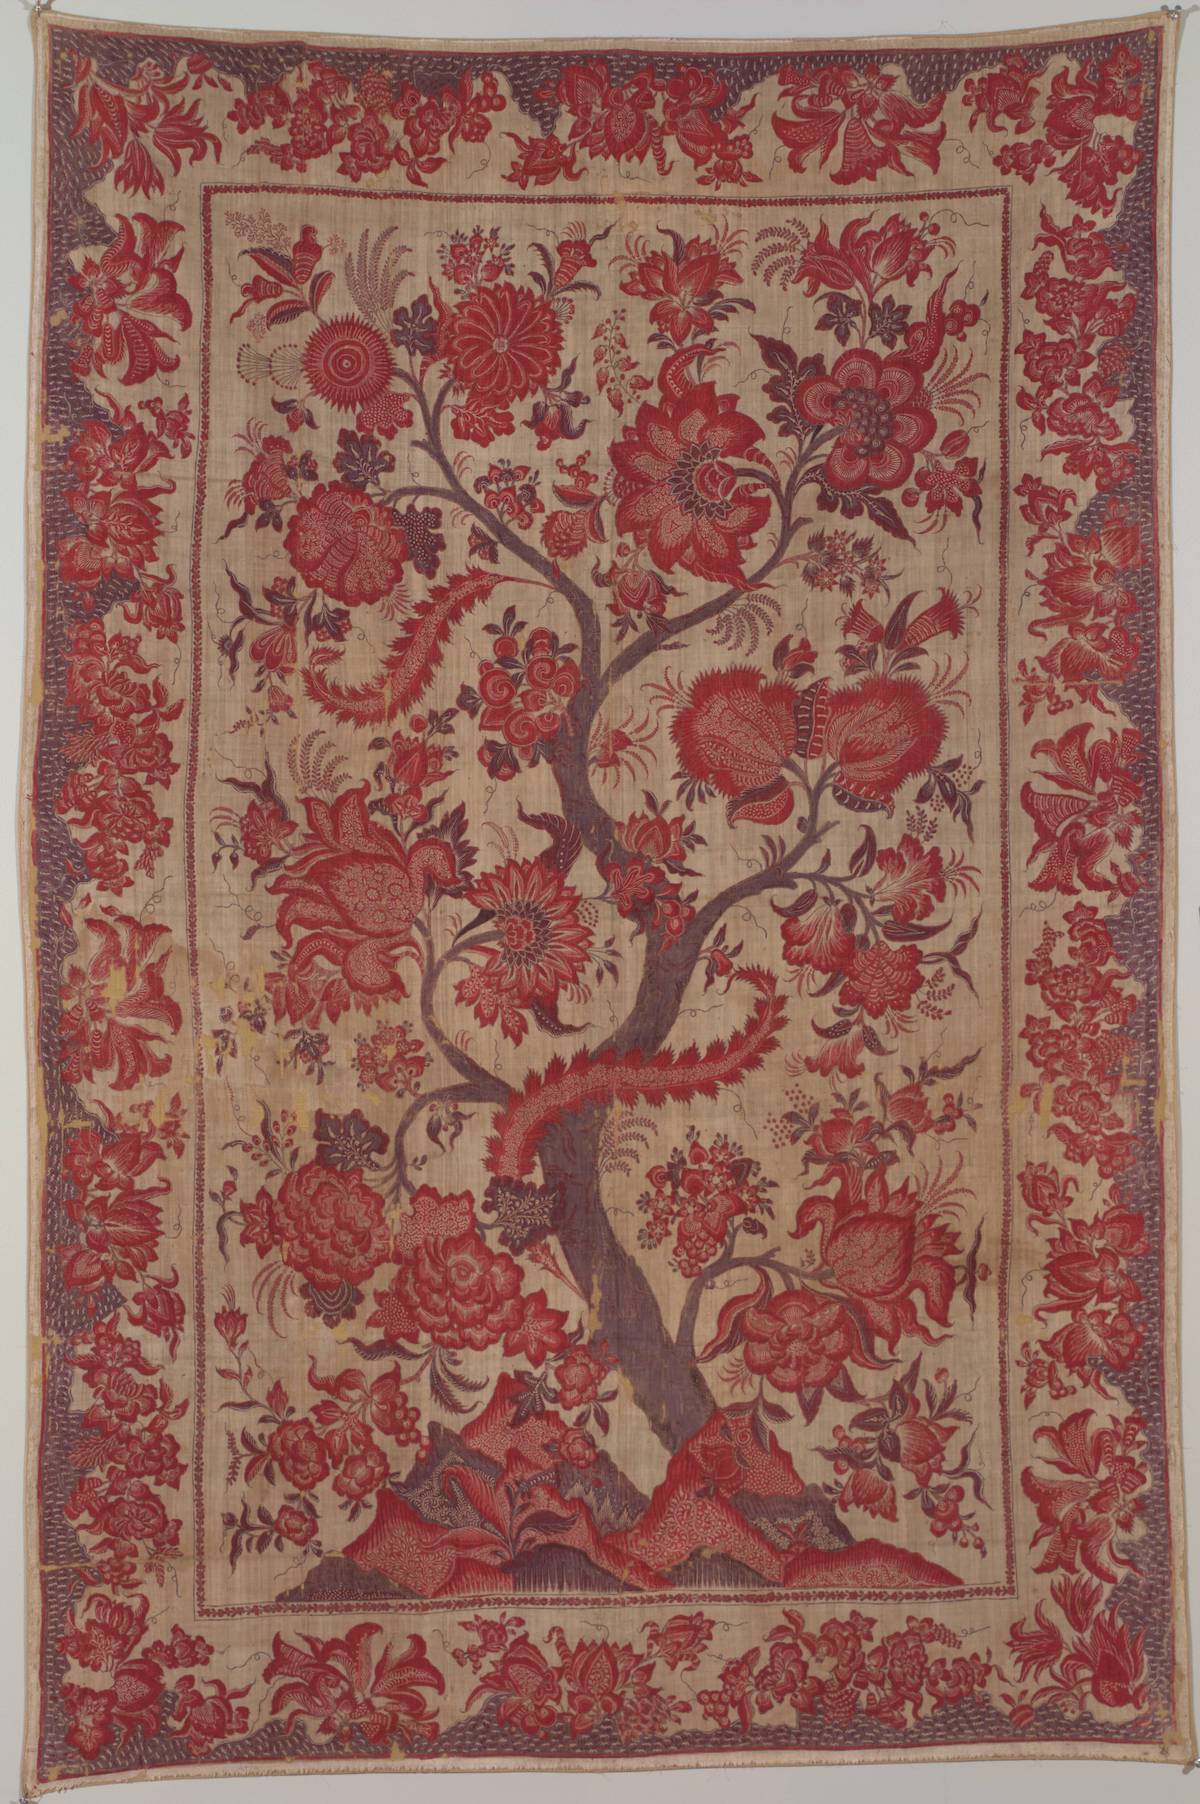 Indian, Coromandel Coast, Palampore, 18th century, cotton, hand-drawn, mordant-dyed and resist-dyed, 70 1/10 x 46 1/10 in. (180 x 119 cm), Banoo and Jeevak Parpia Collection.